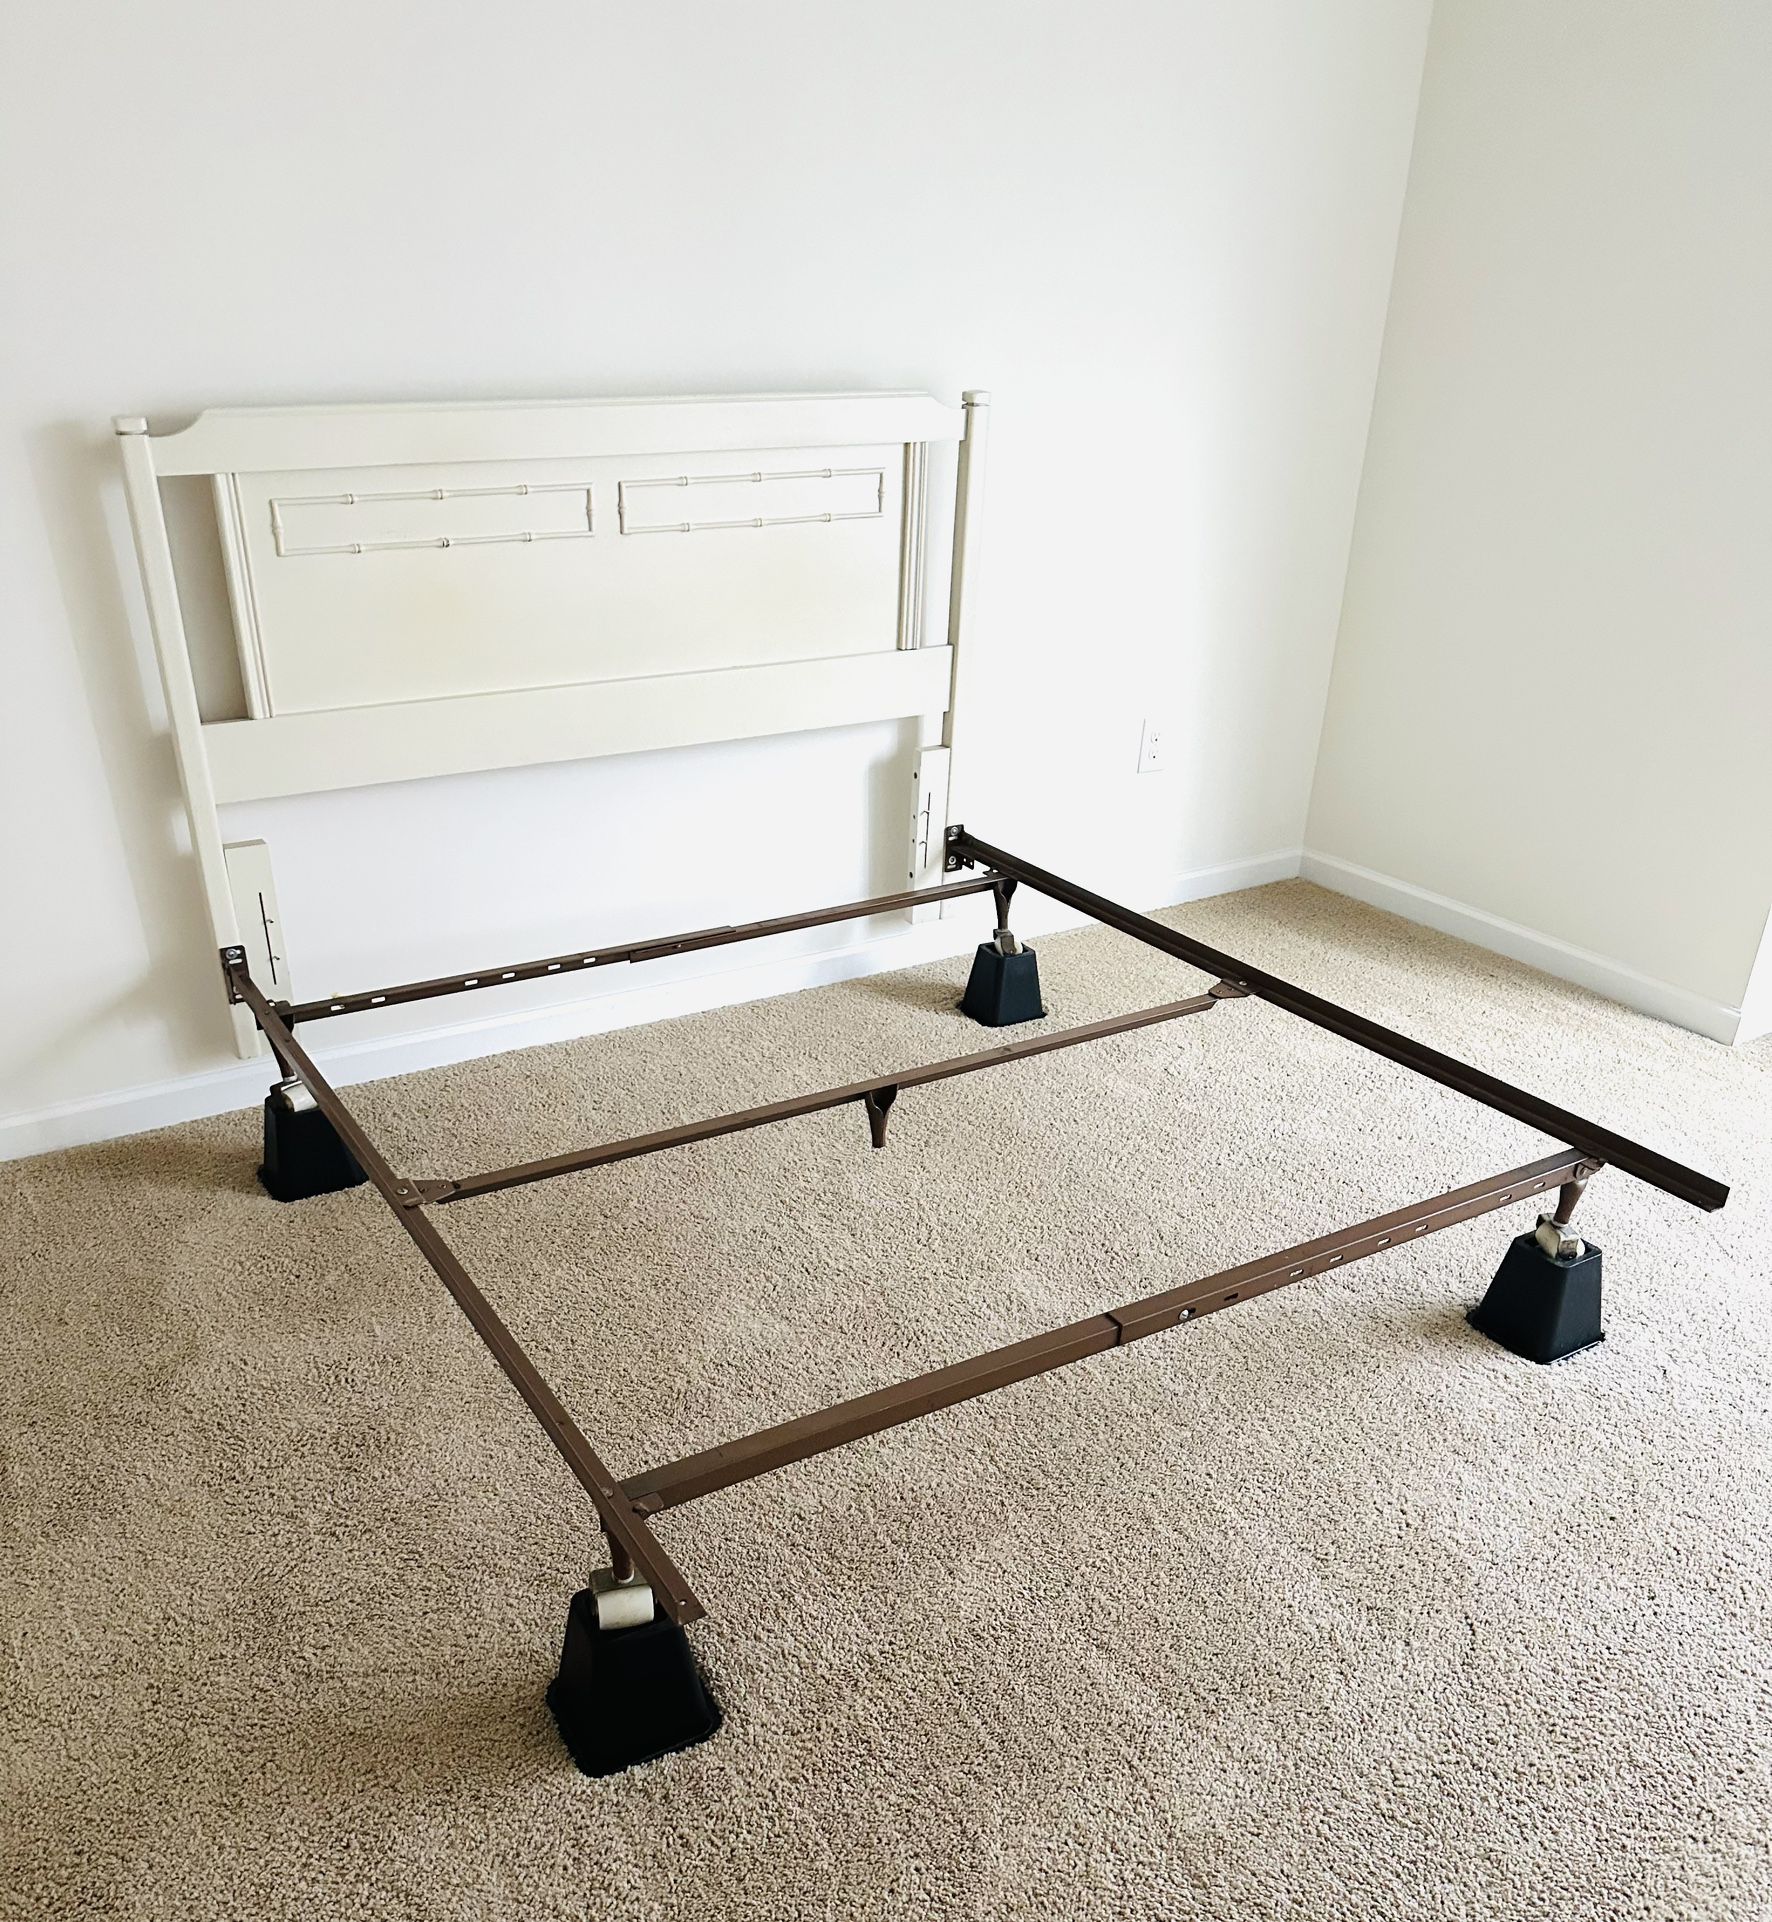 Queen Size Bed Frame, Headboard, Box Spring, and Mattress. 